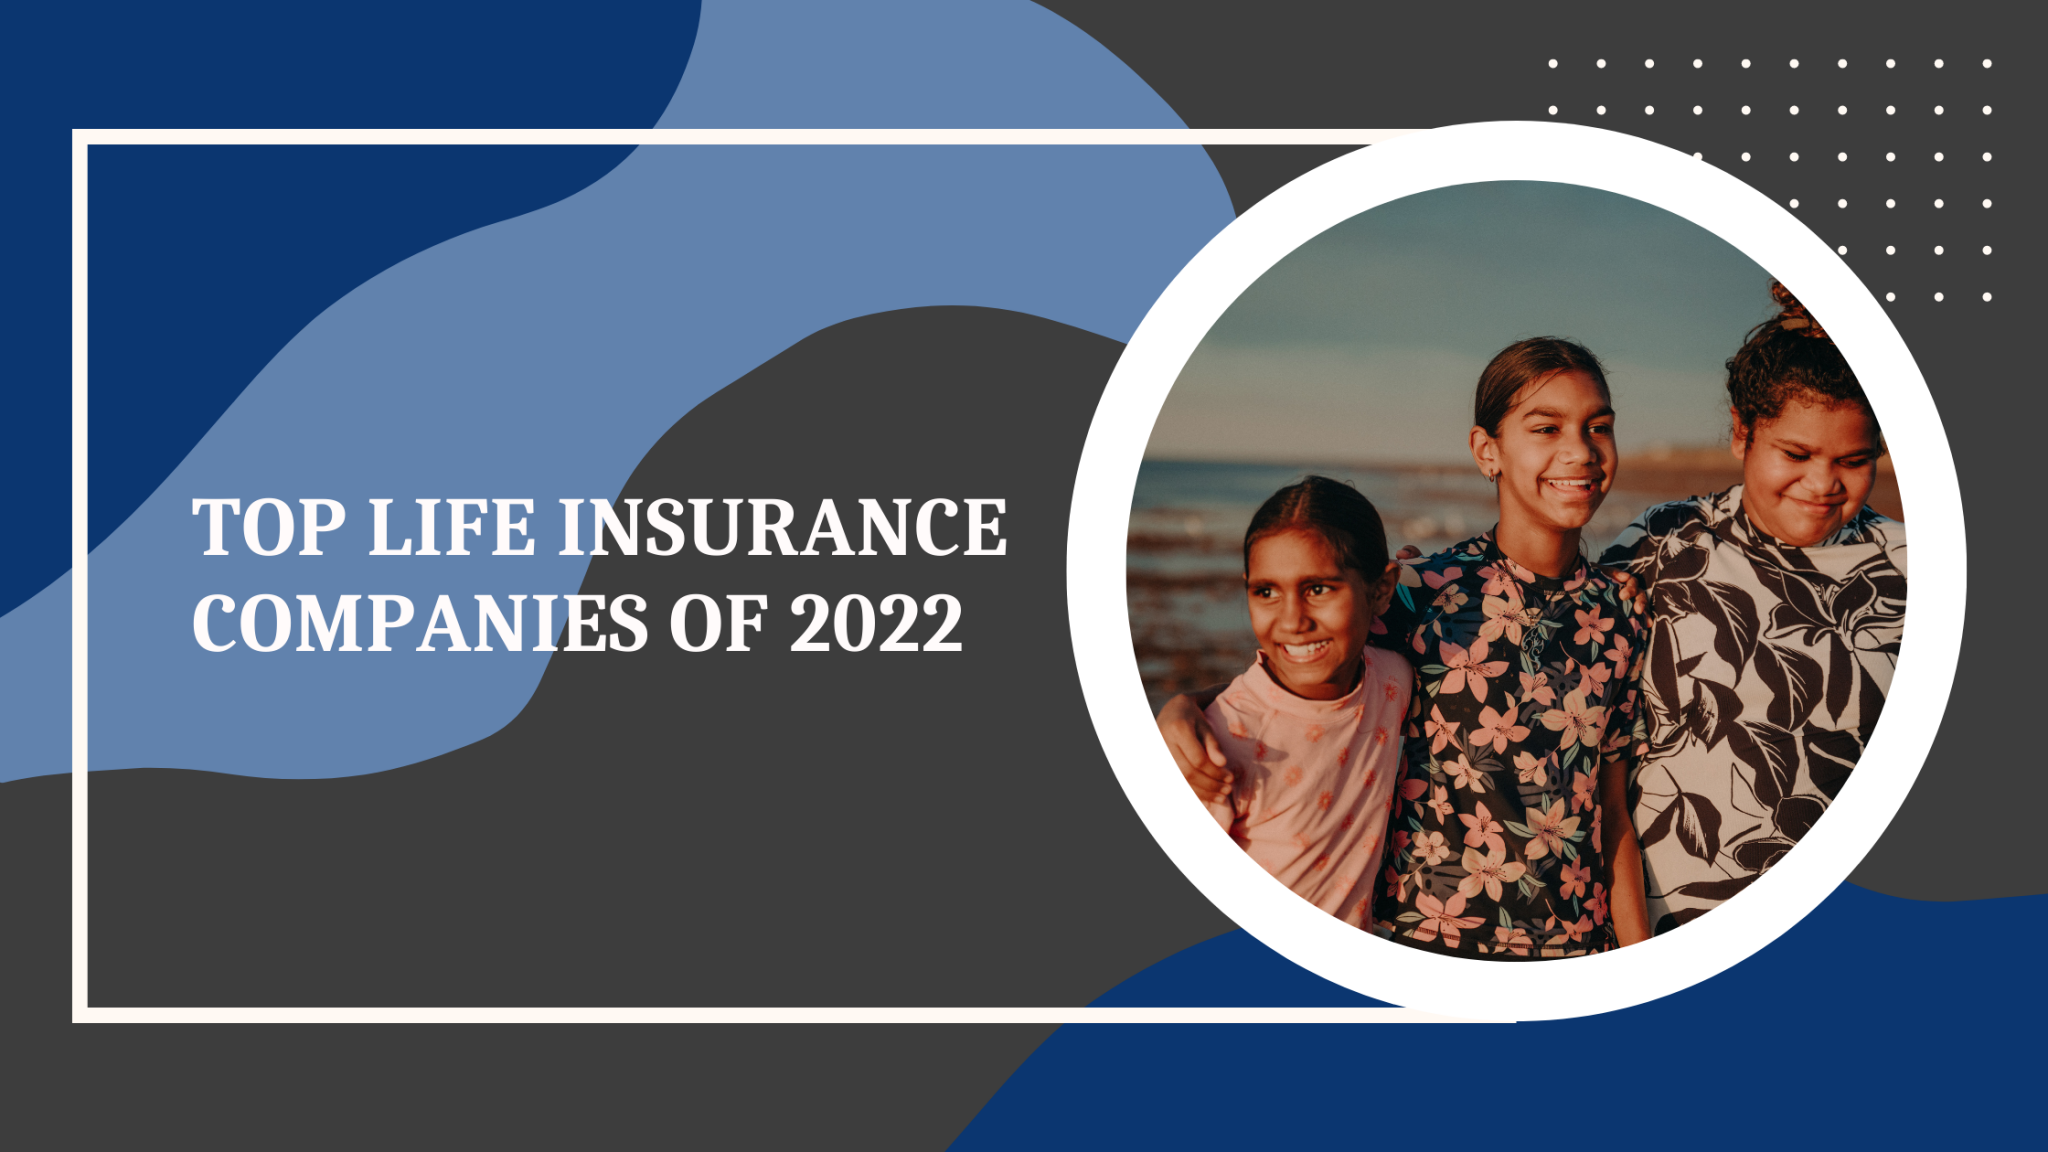 The Top Life Insurance Companies of 2022